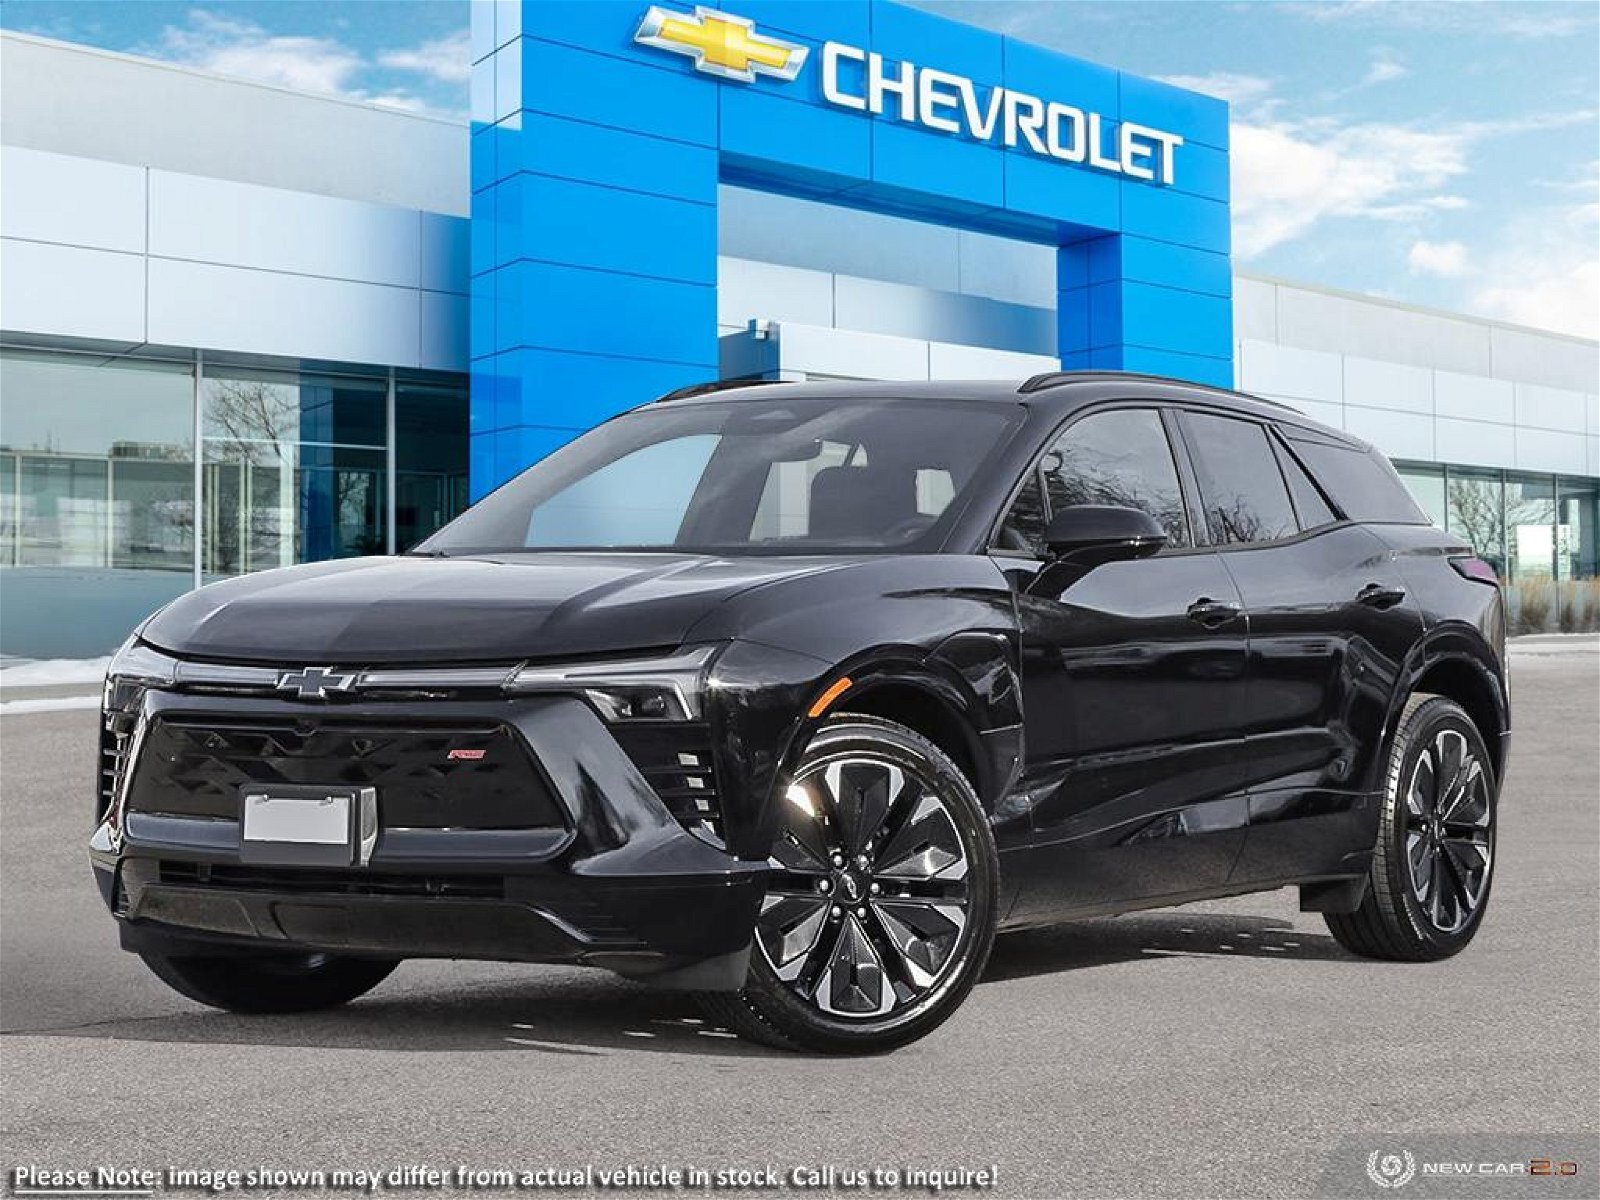 2024 Chevrolet Blazer EV eAWD RS $9000 in Government Incentives!